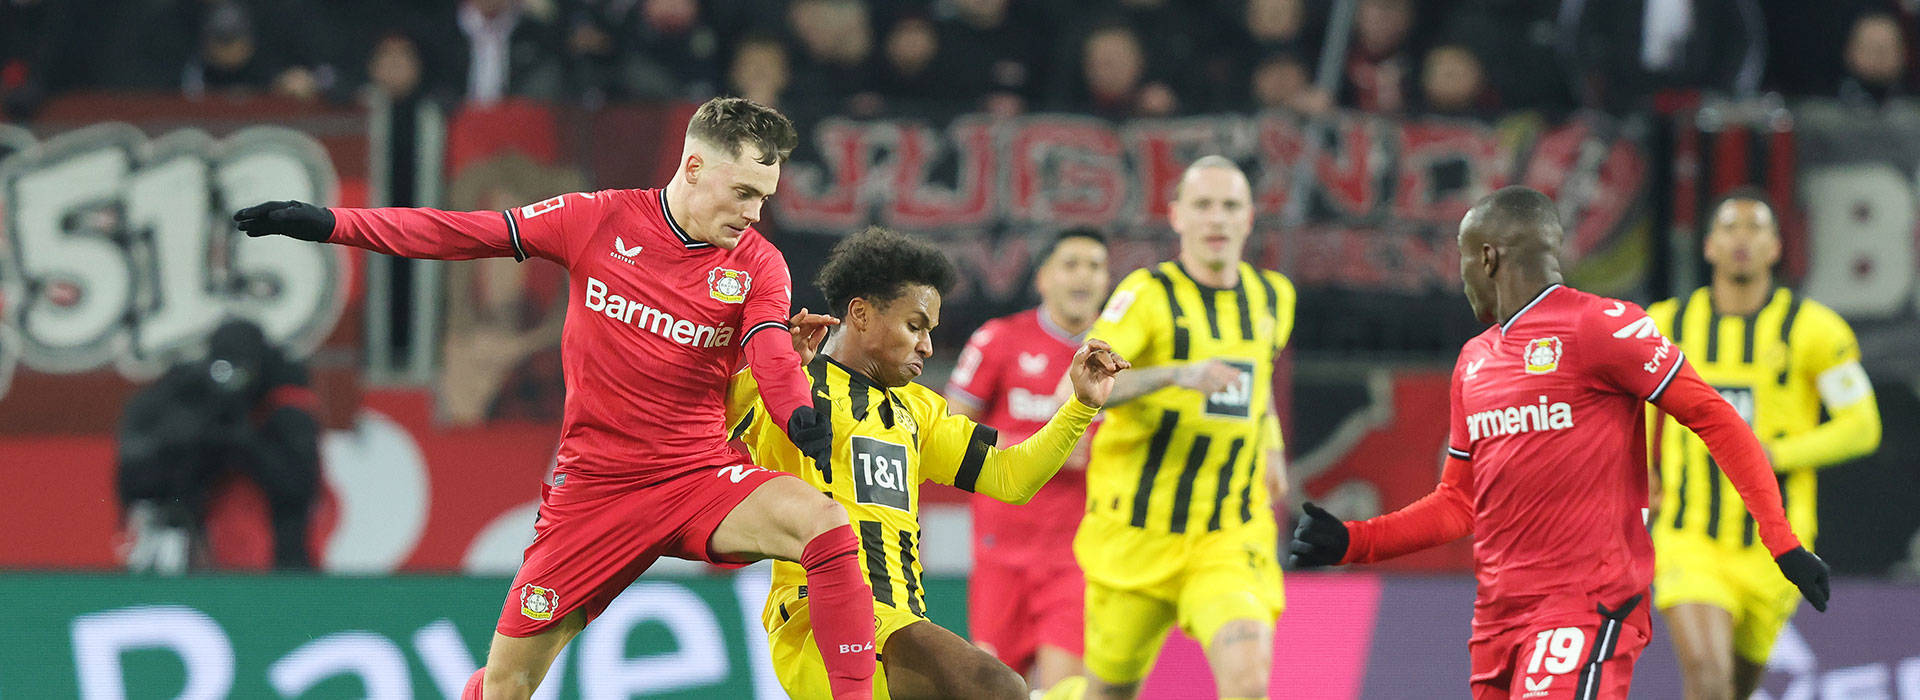 BVB move up to fourth place with 2-0 win in Leverkusen